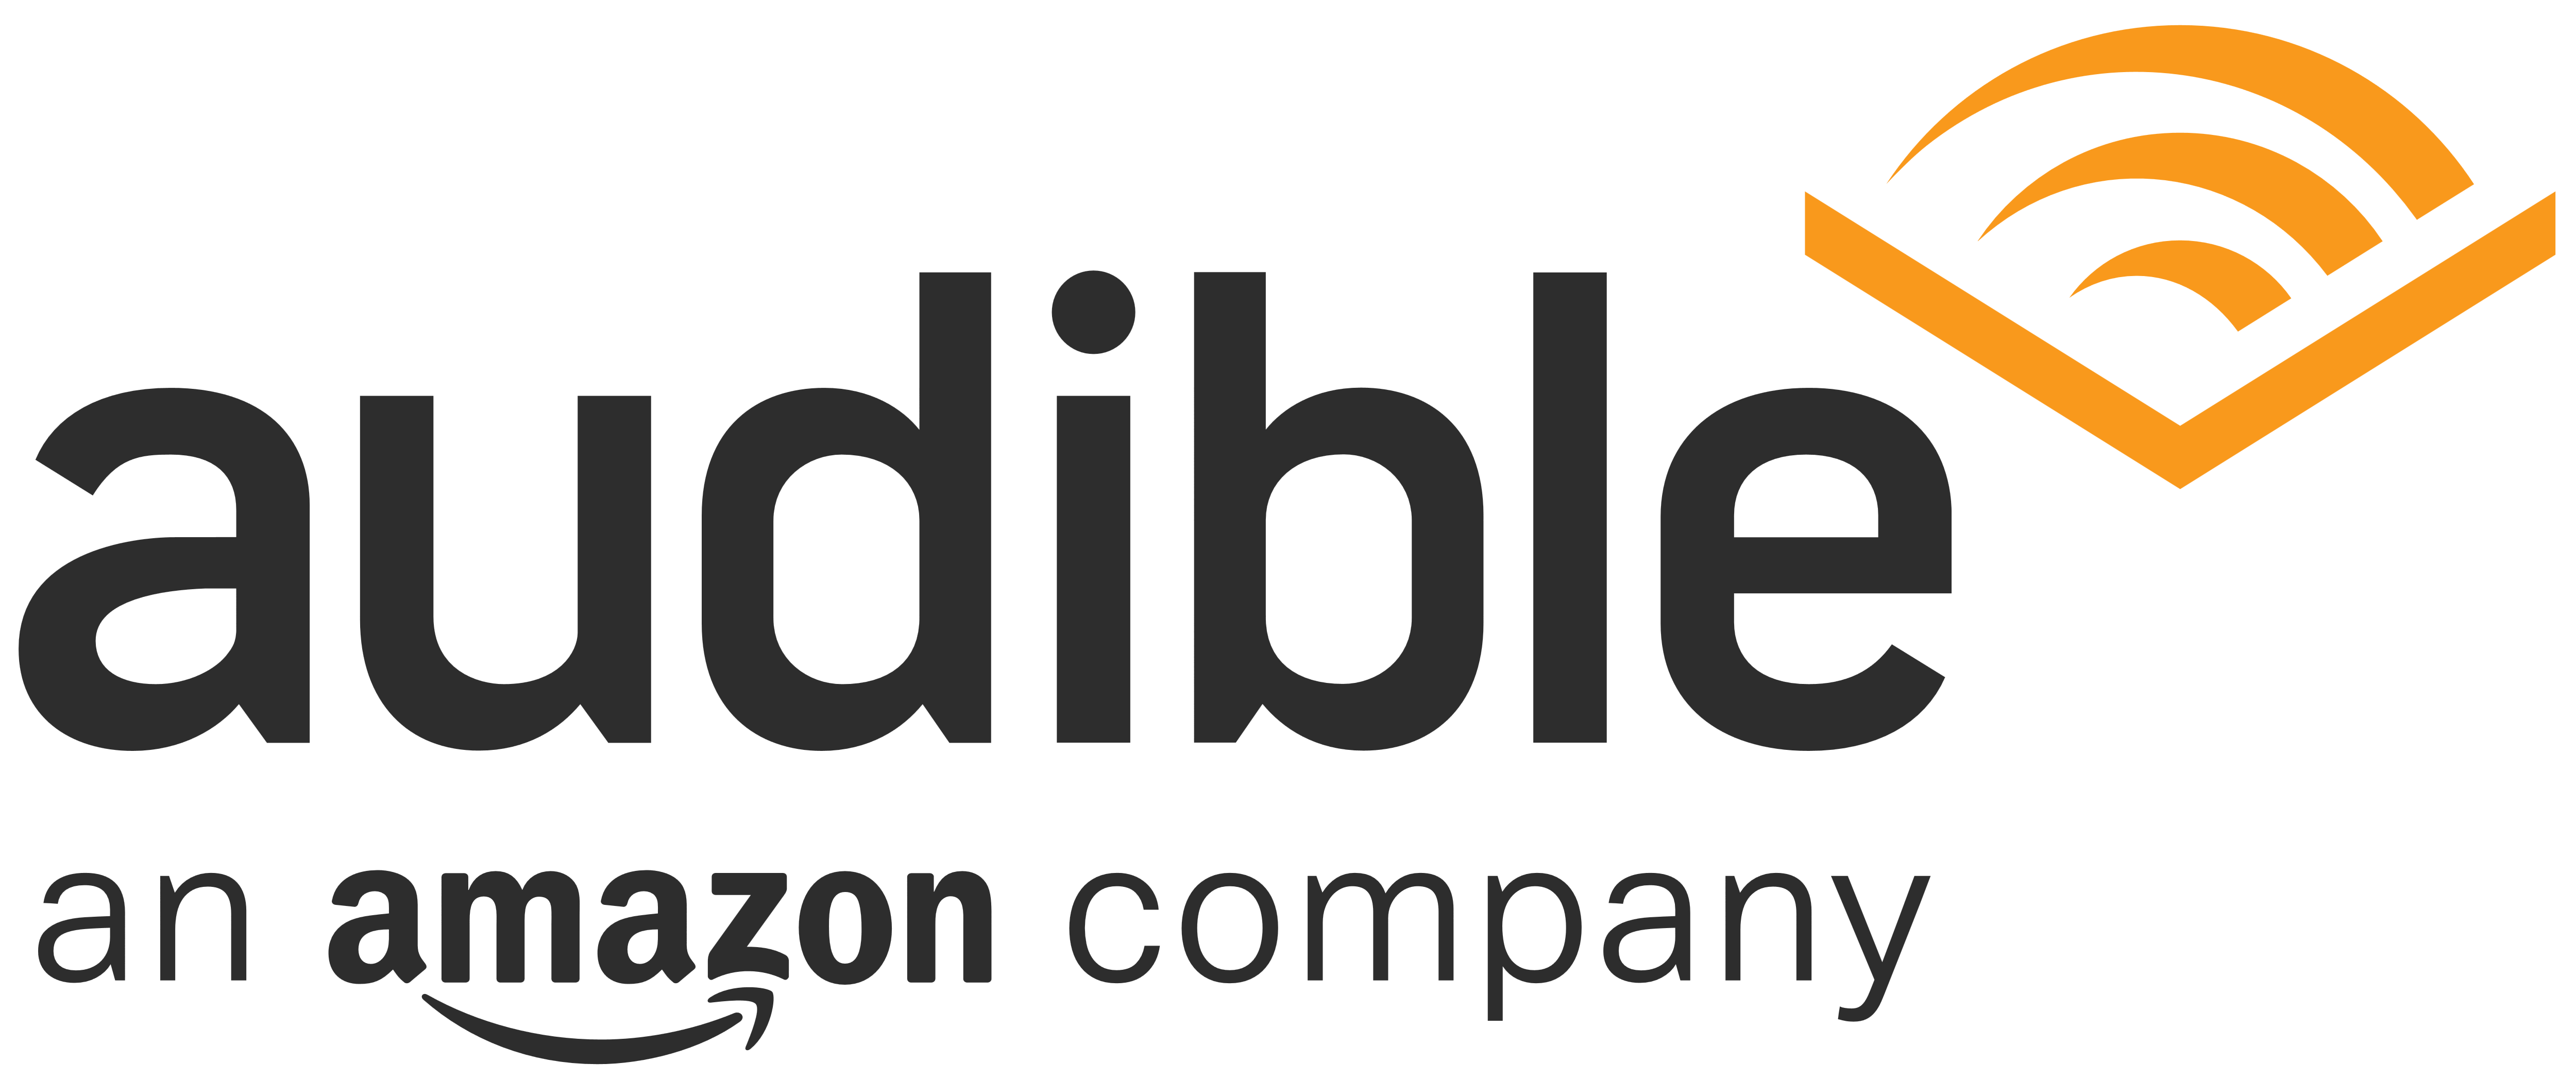 Audible Launches a Cheaper Subscription Tier for Exclusive Podcasts and More